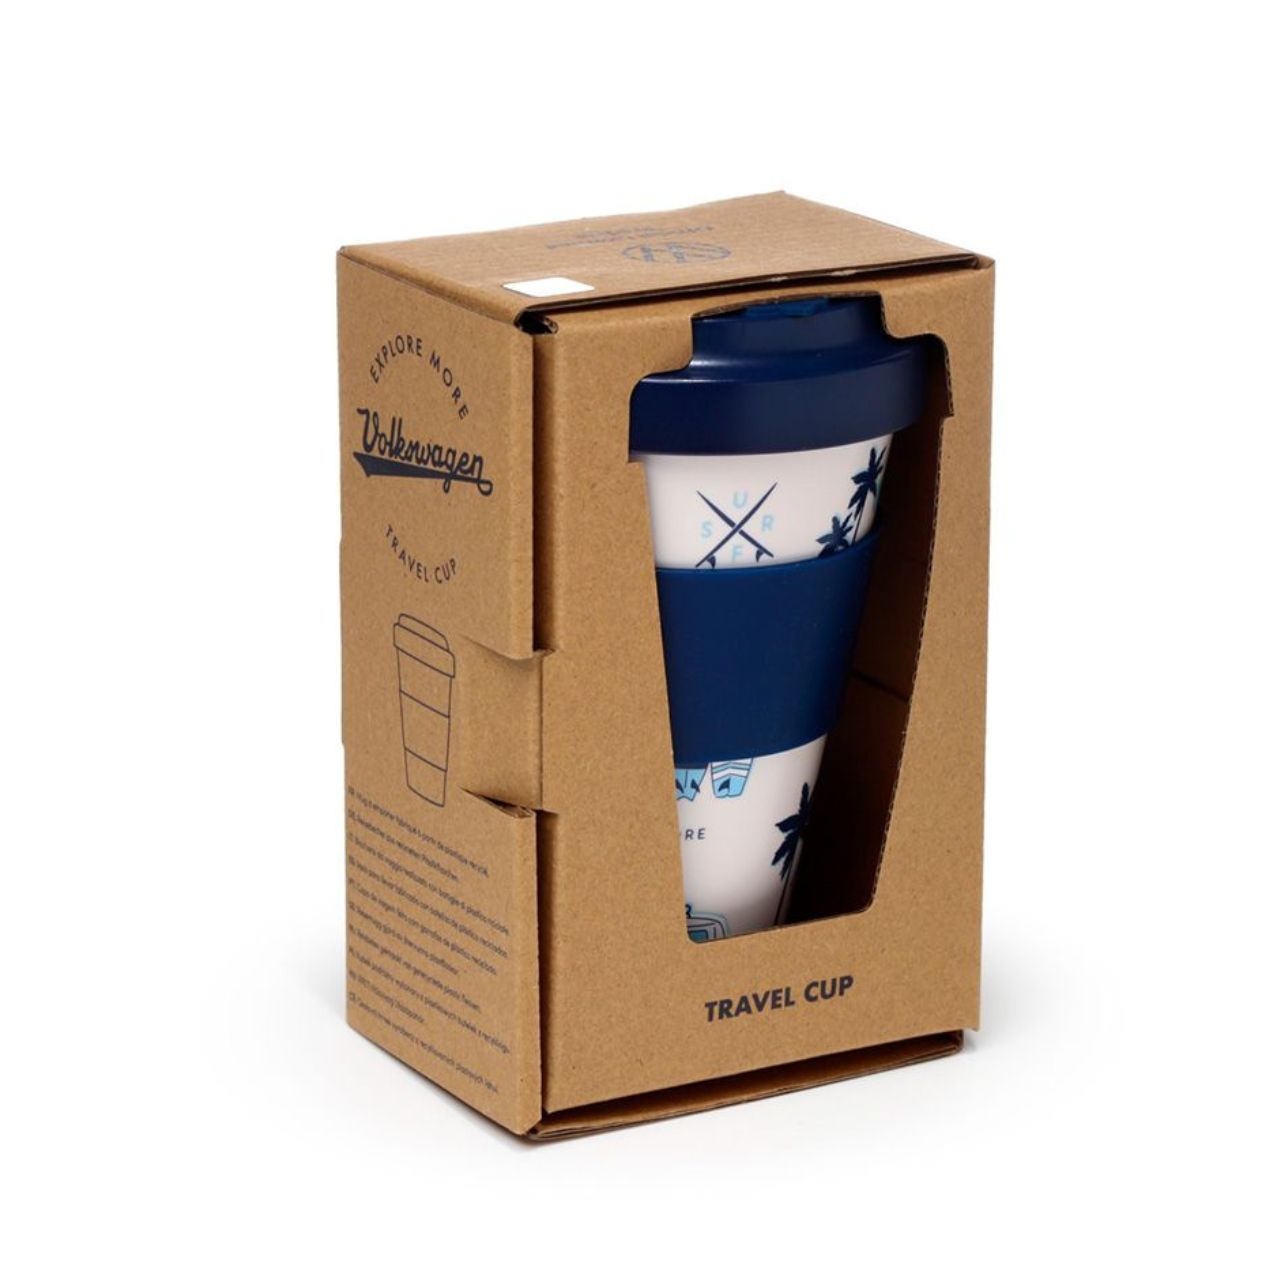 Embrace your adventurous spirit with the Volkswagen VW T1 Camper Bus Explore More Travel Mug. With a spacious 400ml capacity, this travel mug is perfect for long road trips or exploring the outdoors. Its classic design and durable construction make it a reliable companion for all your adventures.